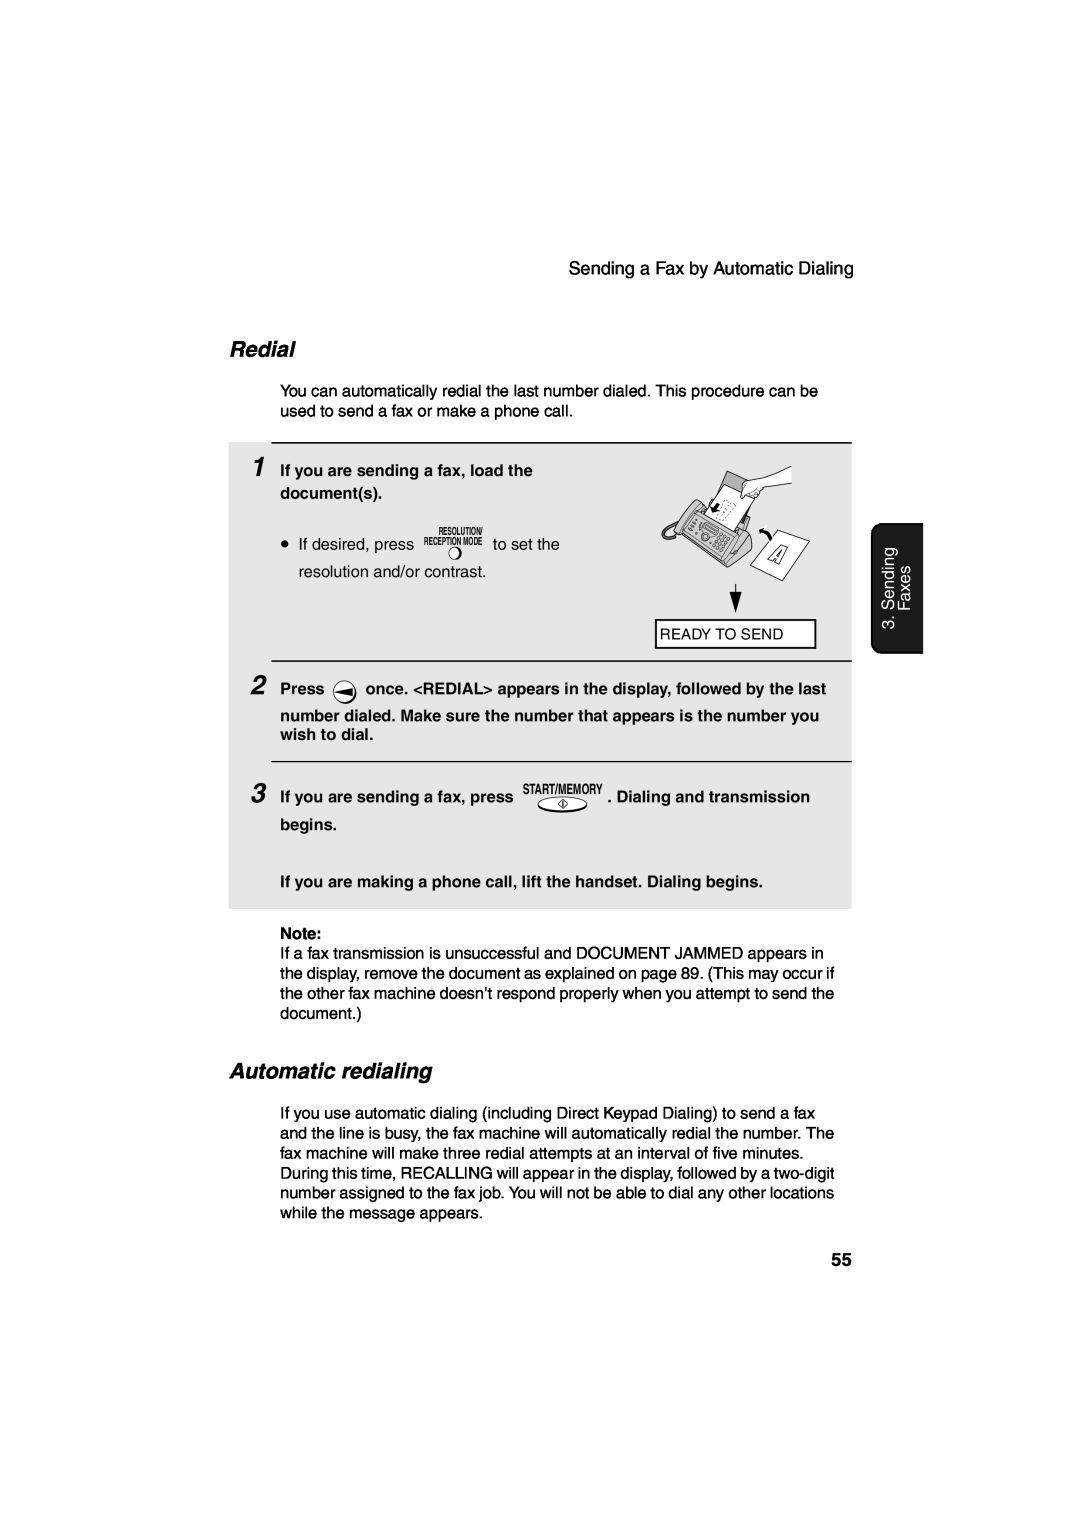 Sharp UX-A260 manual Redial, Automatic redialing, Sending, Faxes, to set the 